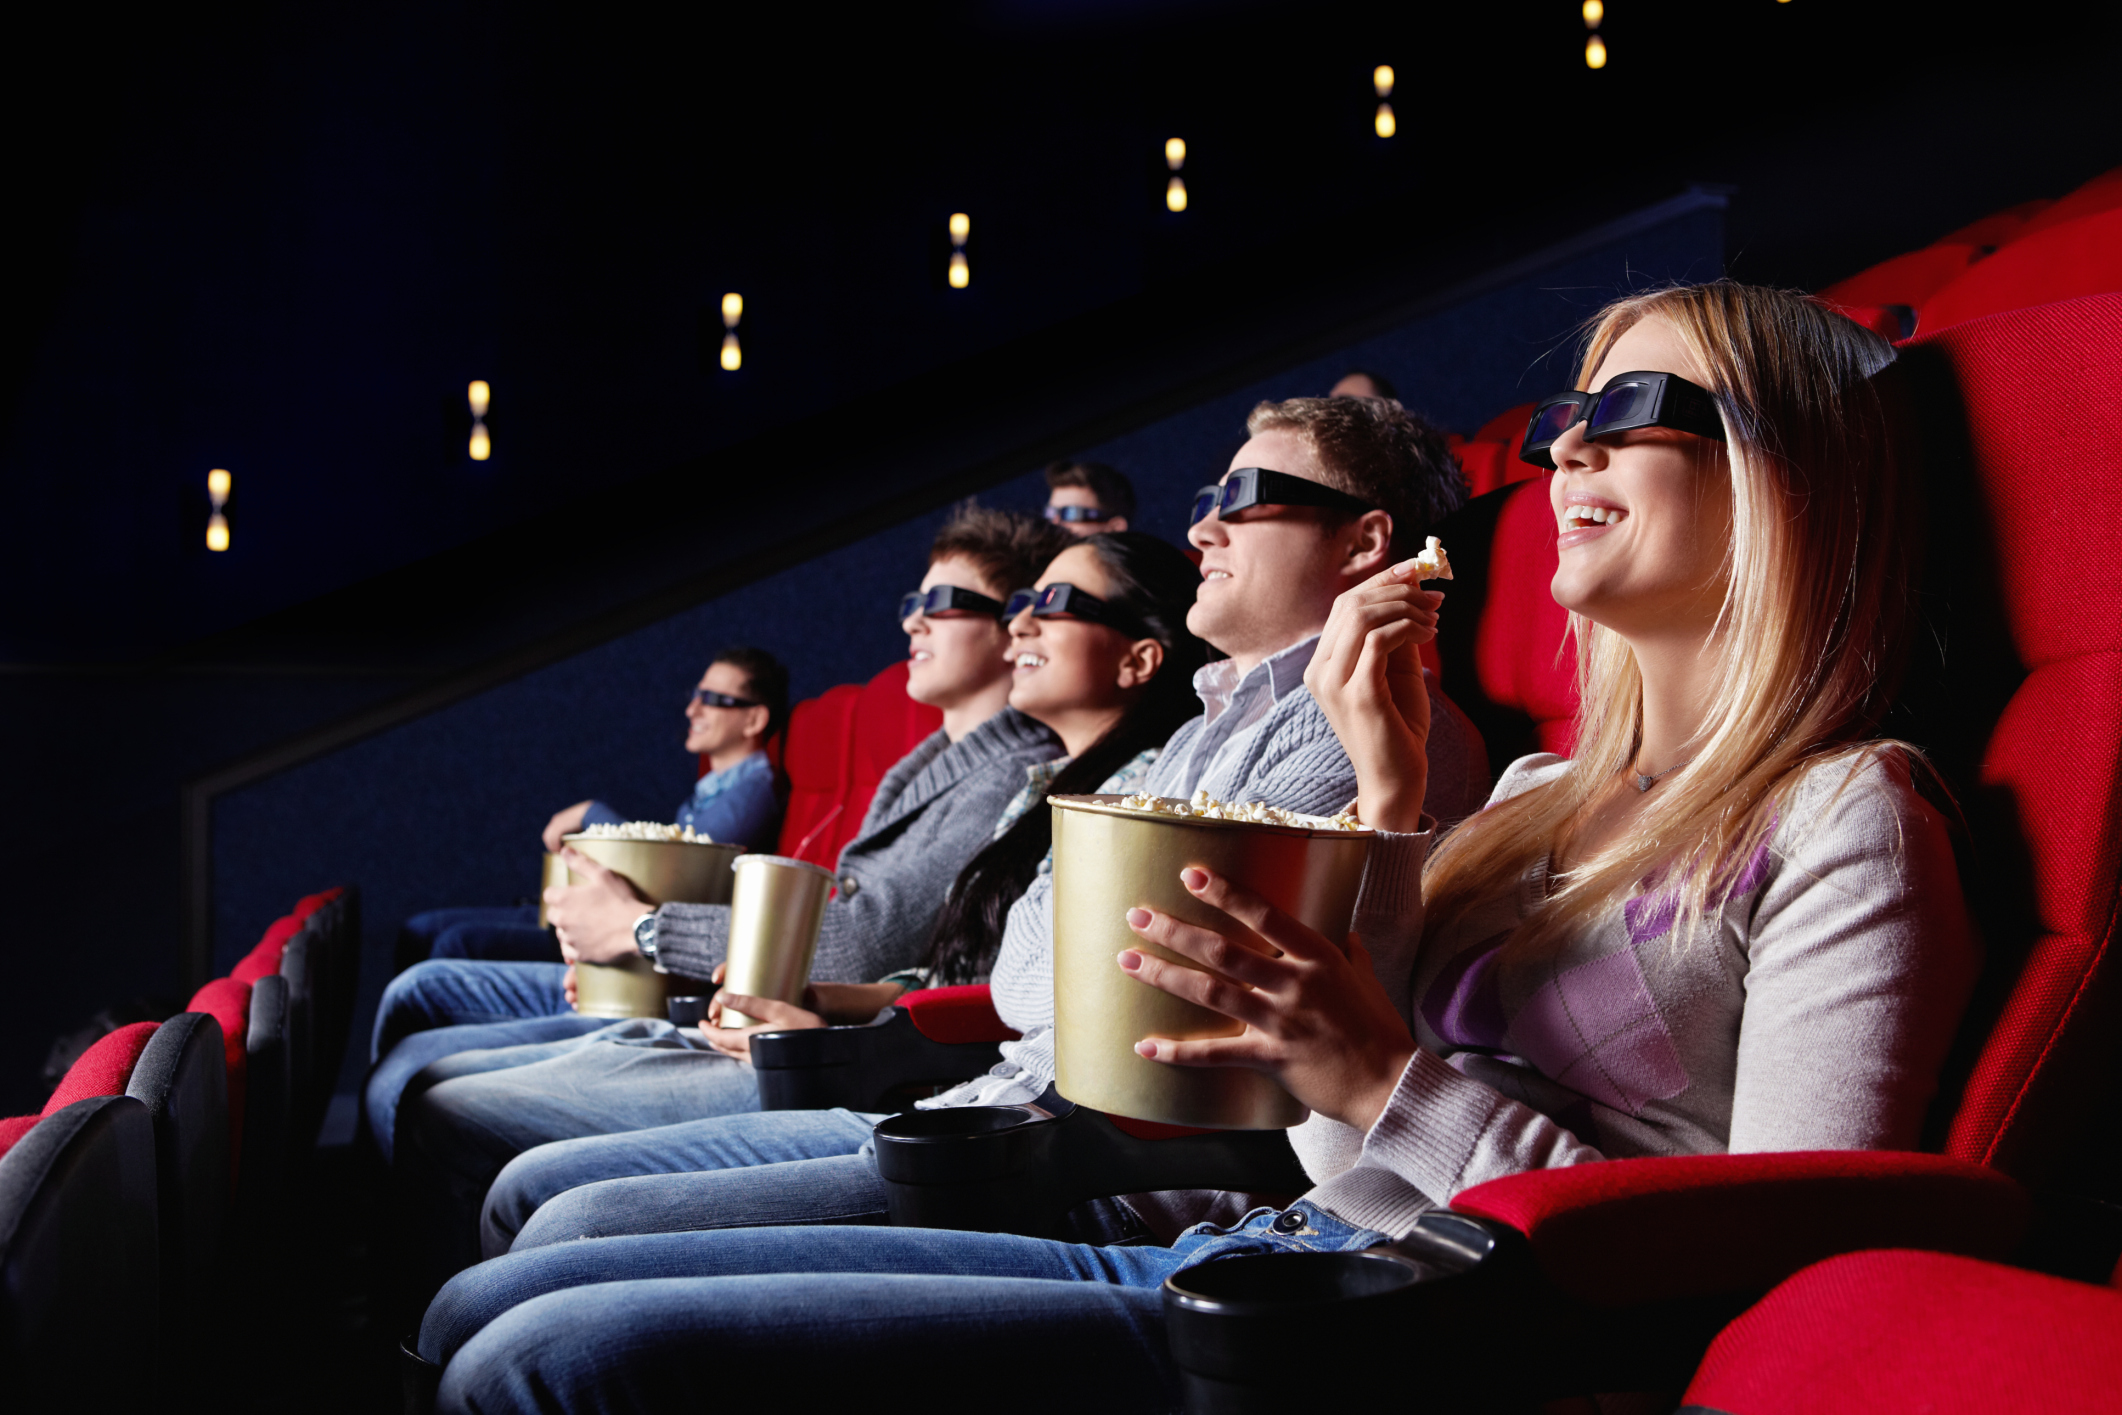 movie-theater-with-people-hd-pictures-4.